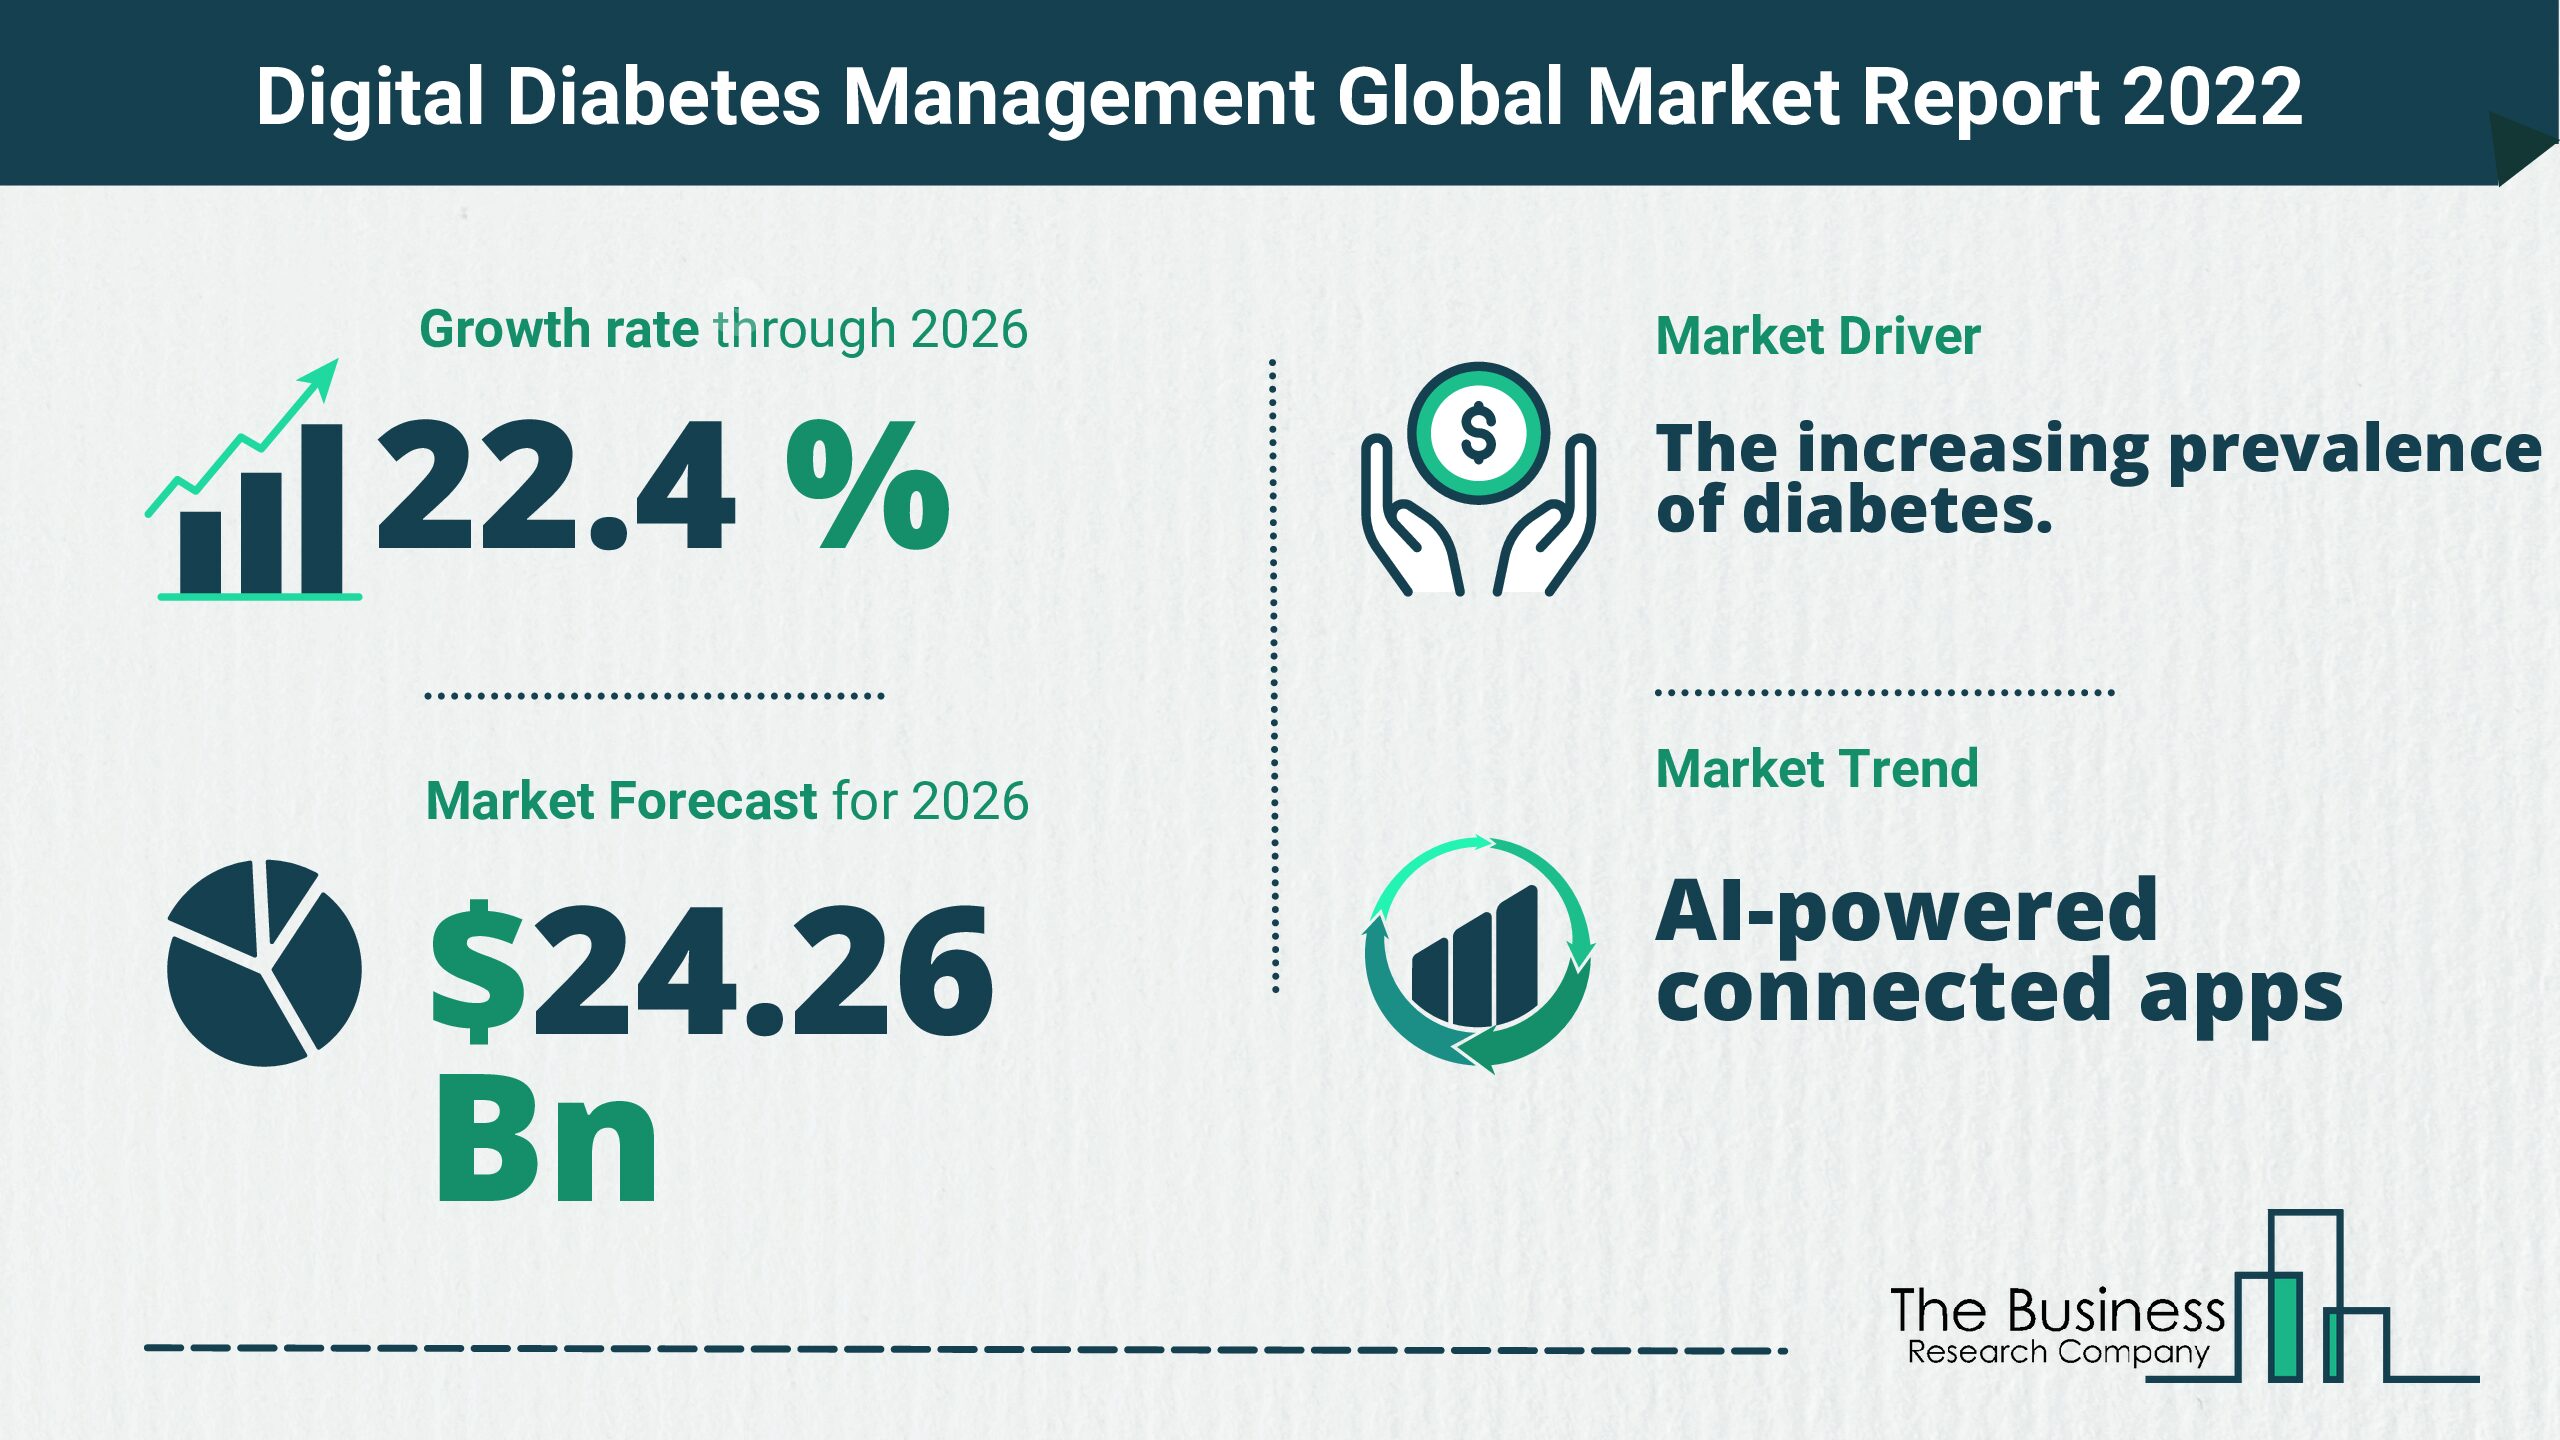 Latest Digital Diabetes Management Market Growth Study 2022-2026 By The Business Research Company